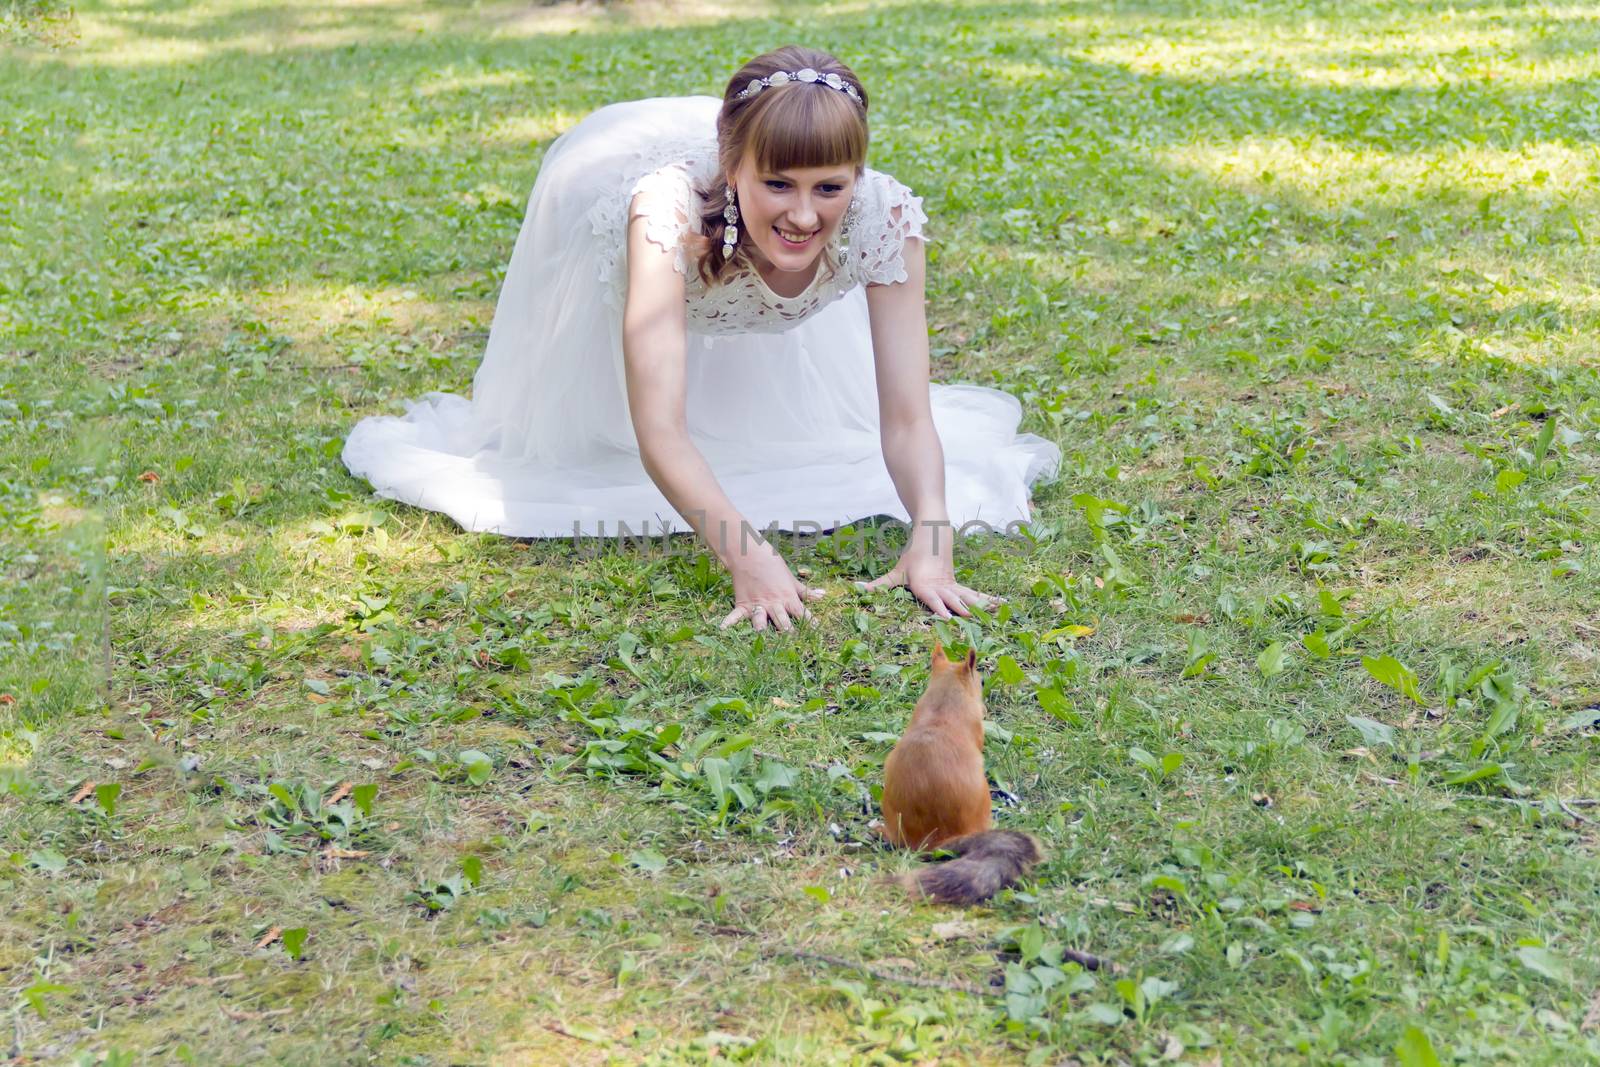 Bride in white lying on grass next to the squirrel by Julialine